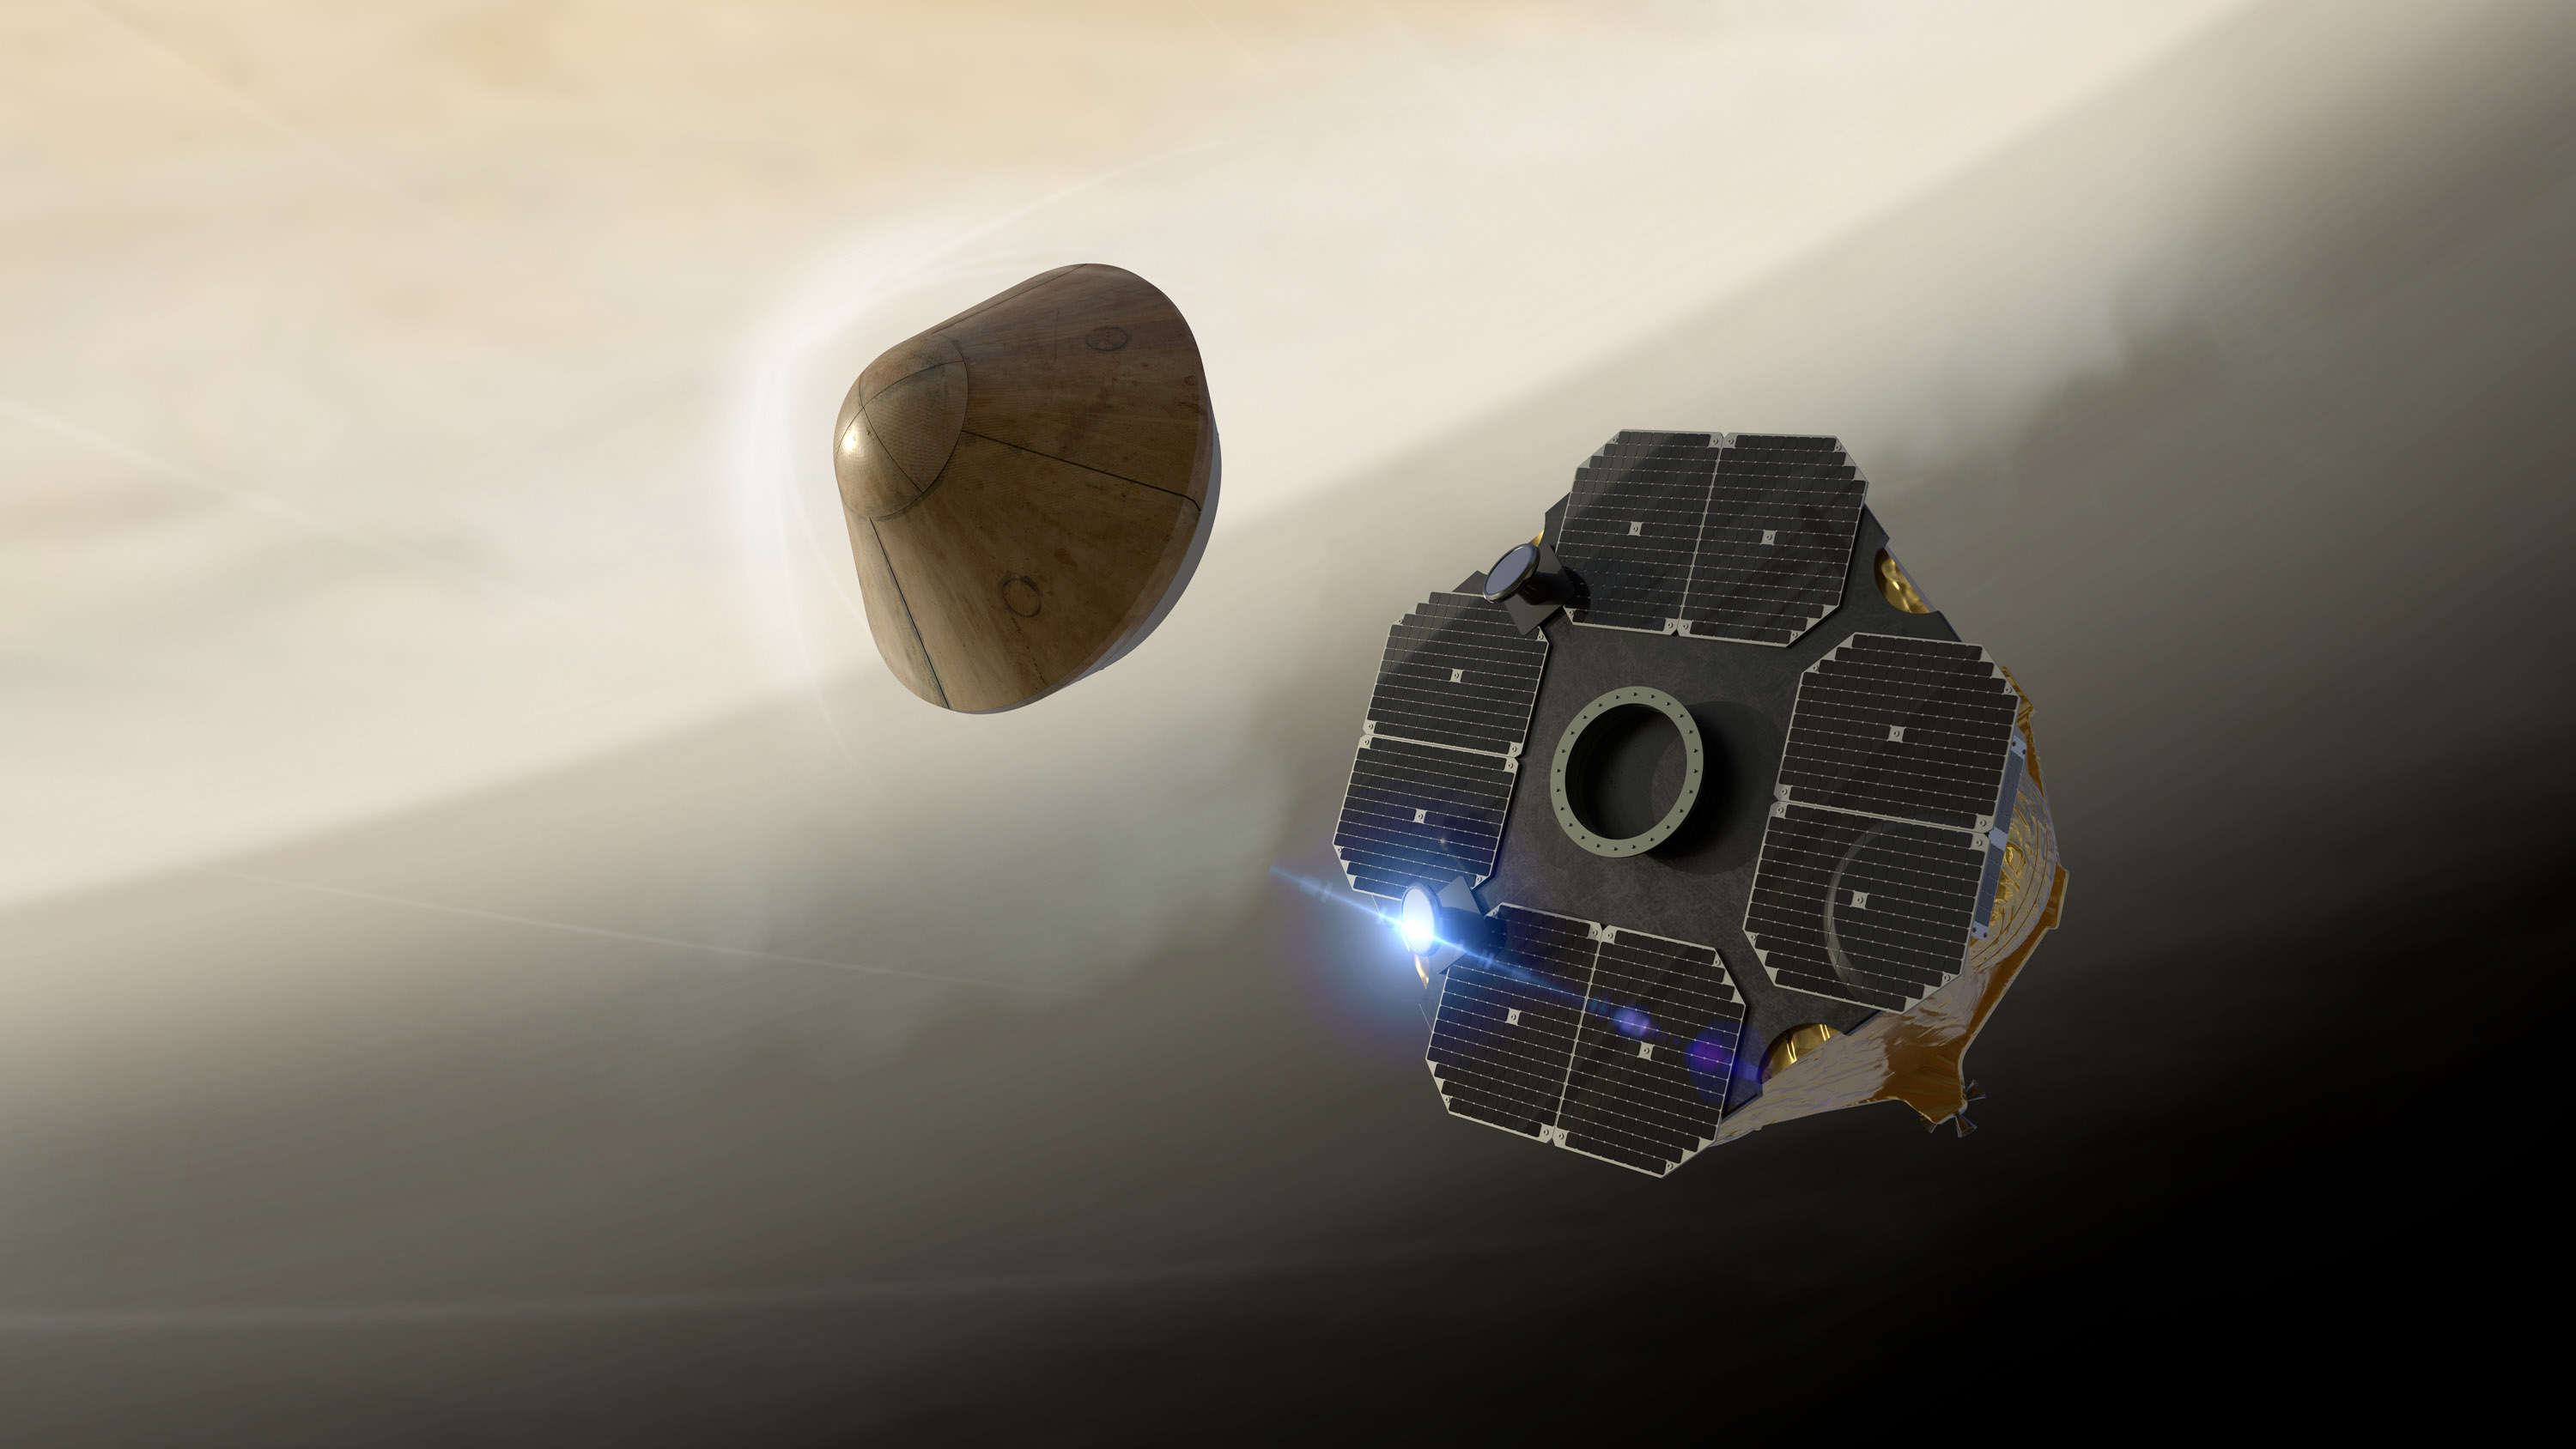 artist's concept of the probe after being deployed by the spacecraft toward Venus